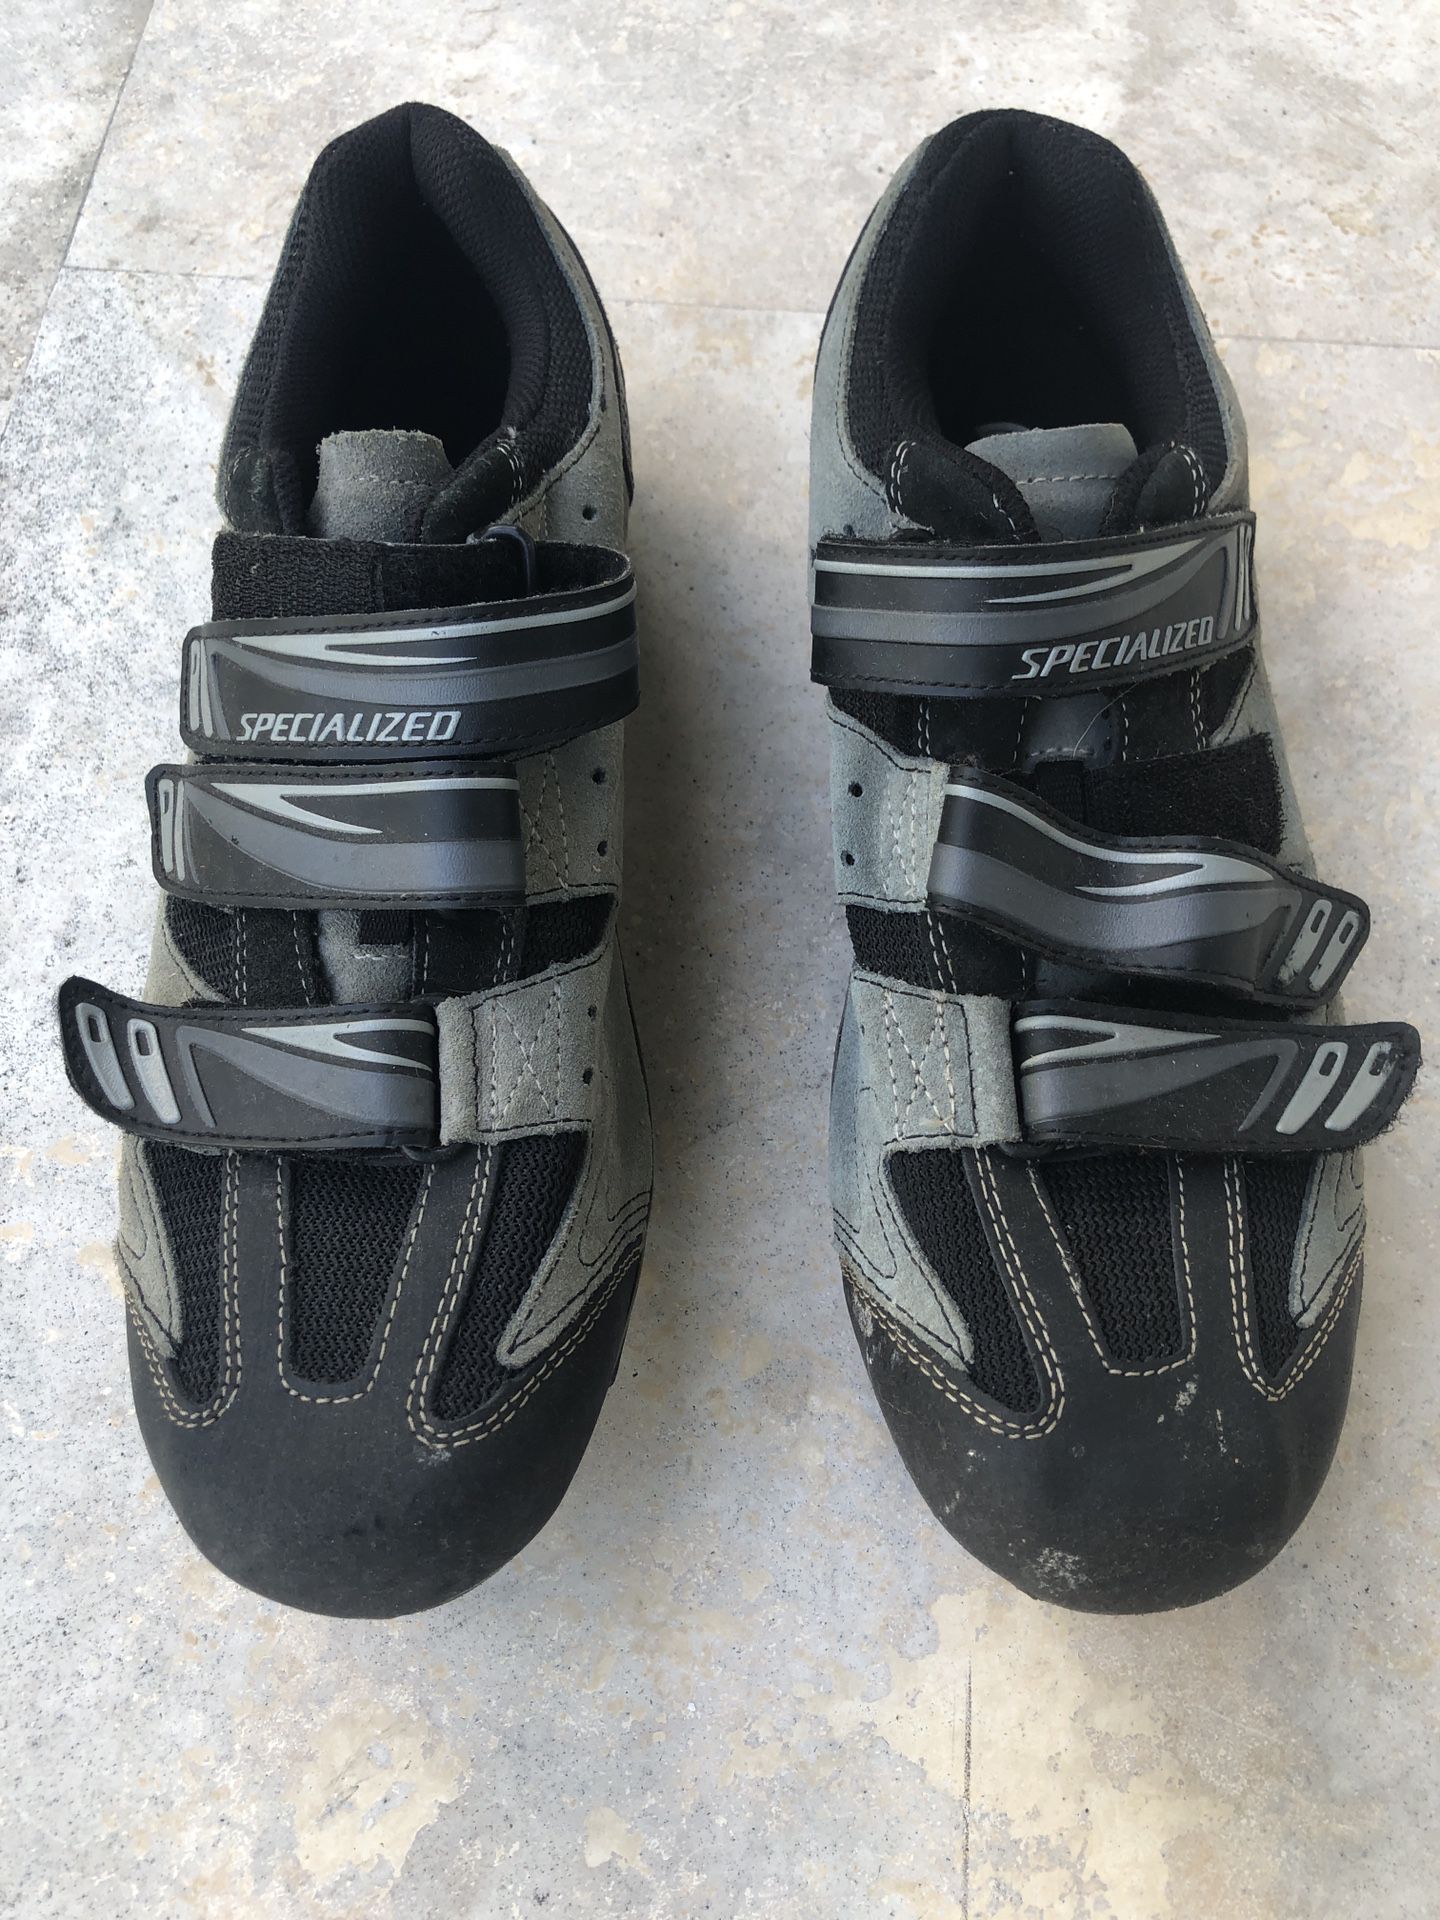 Men’s Specialized Mountain Bike Shoes (47) and Shimano Clips